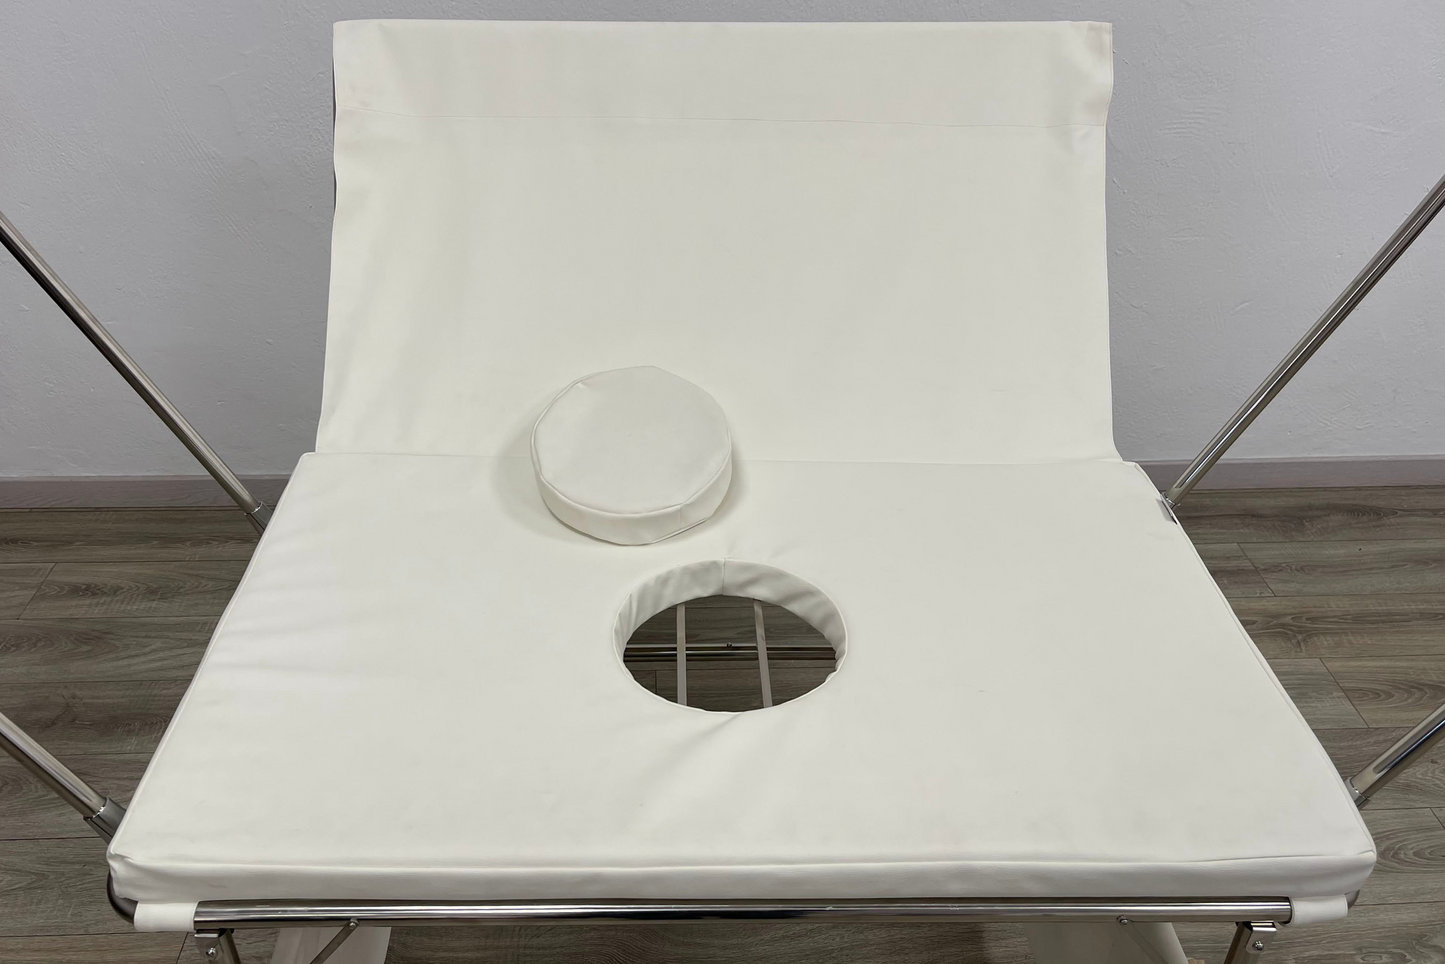 The Newborn Posing Table, a portable, lightweight, and foldable posing table for baby photography, offers comfort, safety, and professionalism while providing versatility and convenience.